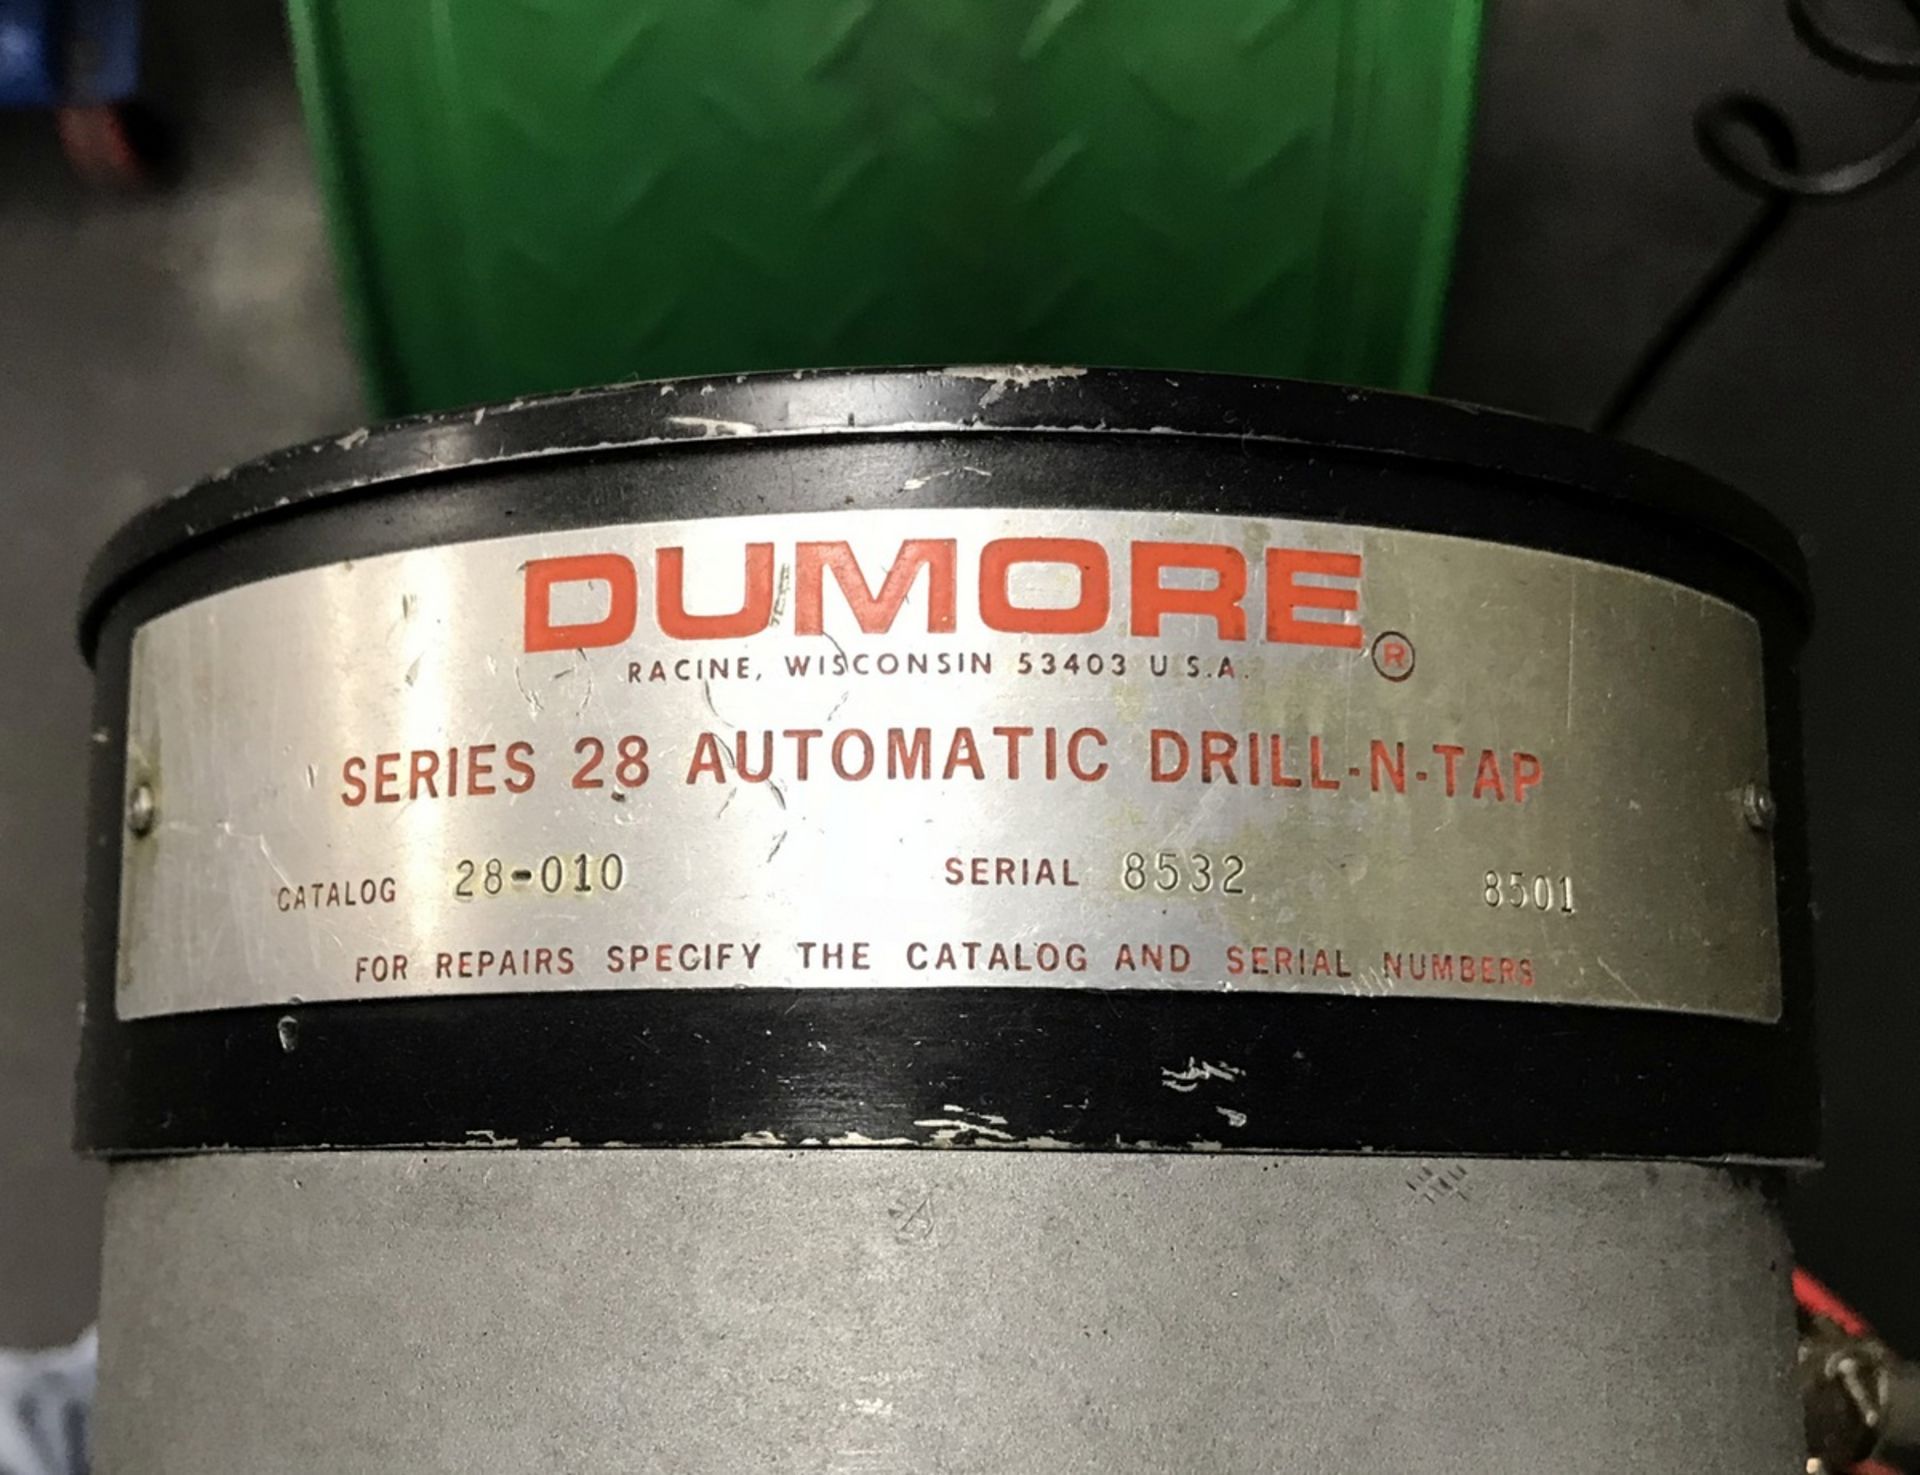 Dumore Series 28 Dual Head Drill-N-Tapping Center - Image 7 of 8